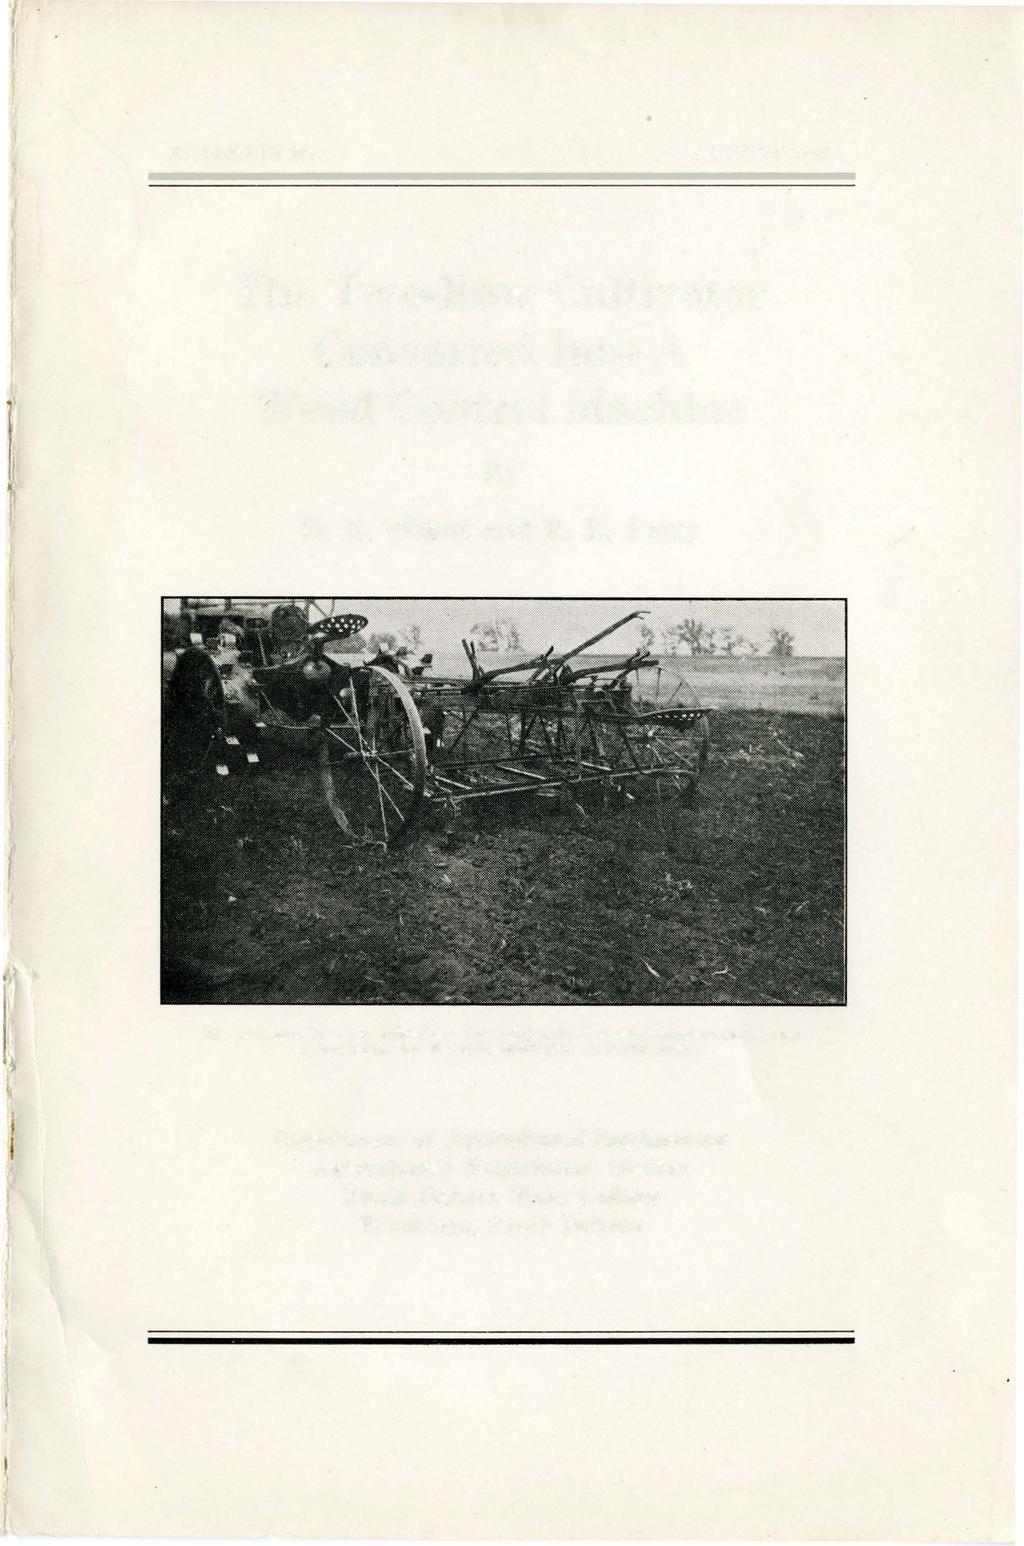 BULLETIN 303 AUGUST 1936 The Two-Row Cultivator Converted Into A Weed Control Machine By D. E. Wiant and R. L.